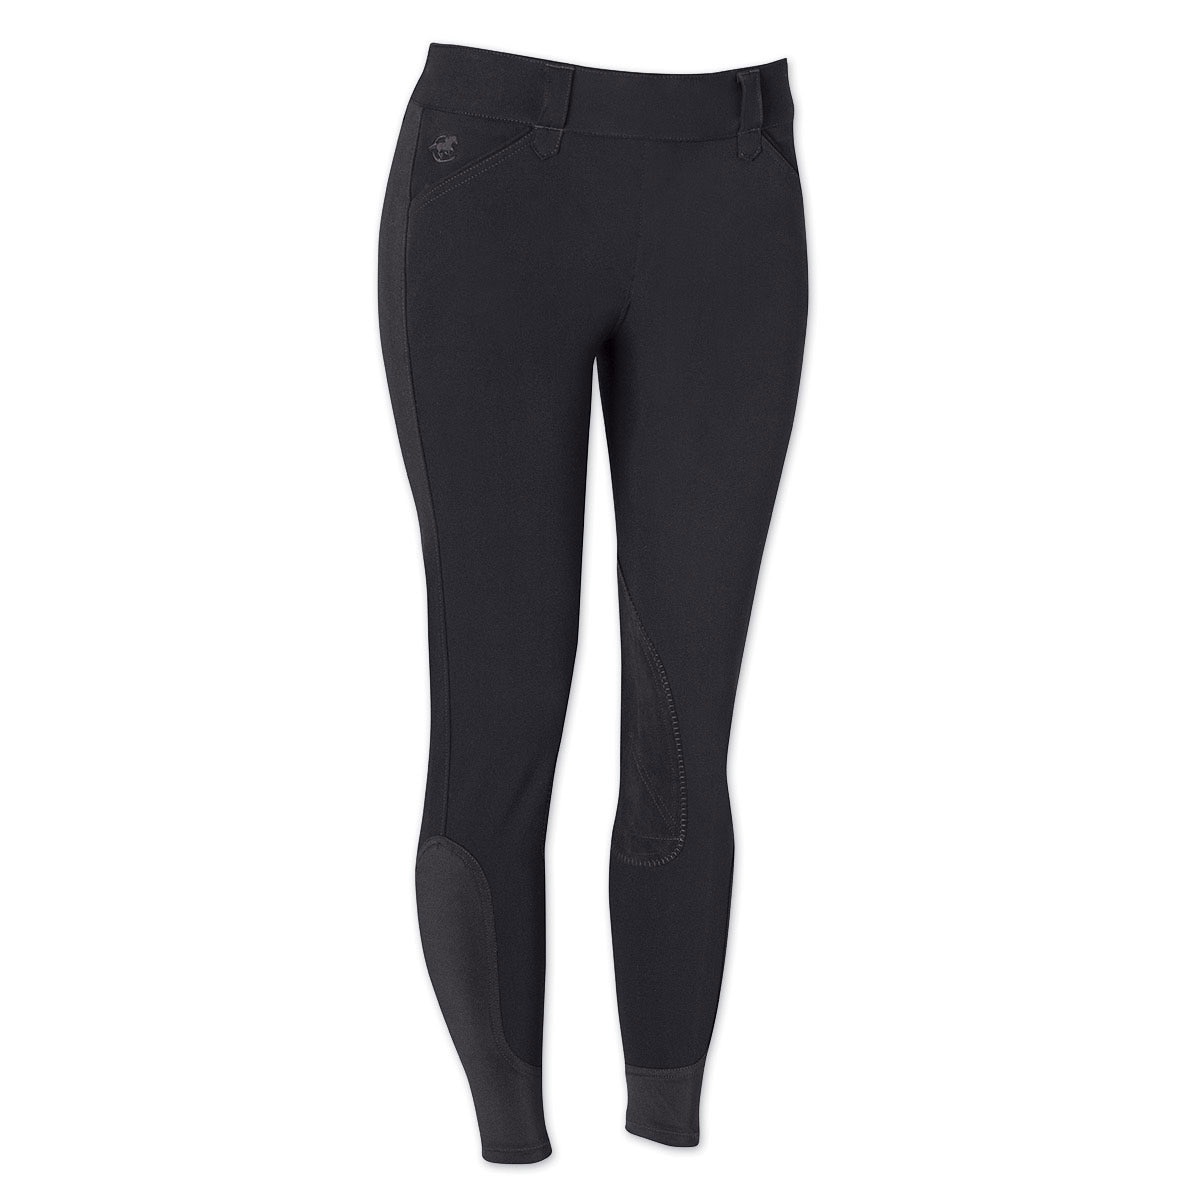 Piper Breeches by SmartPak - Classic Side Zip Knee Patch